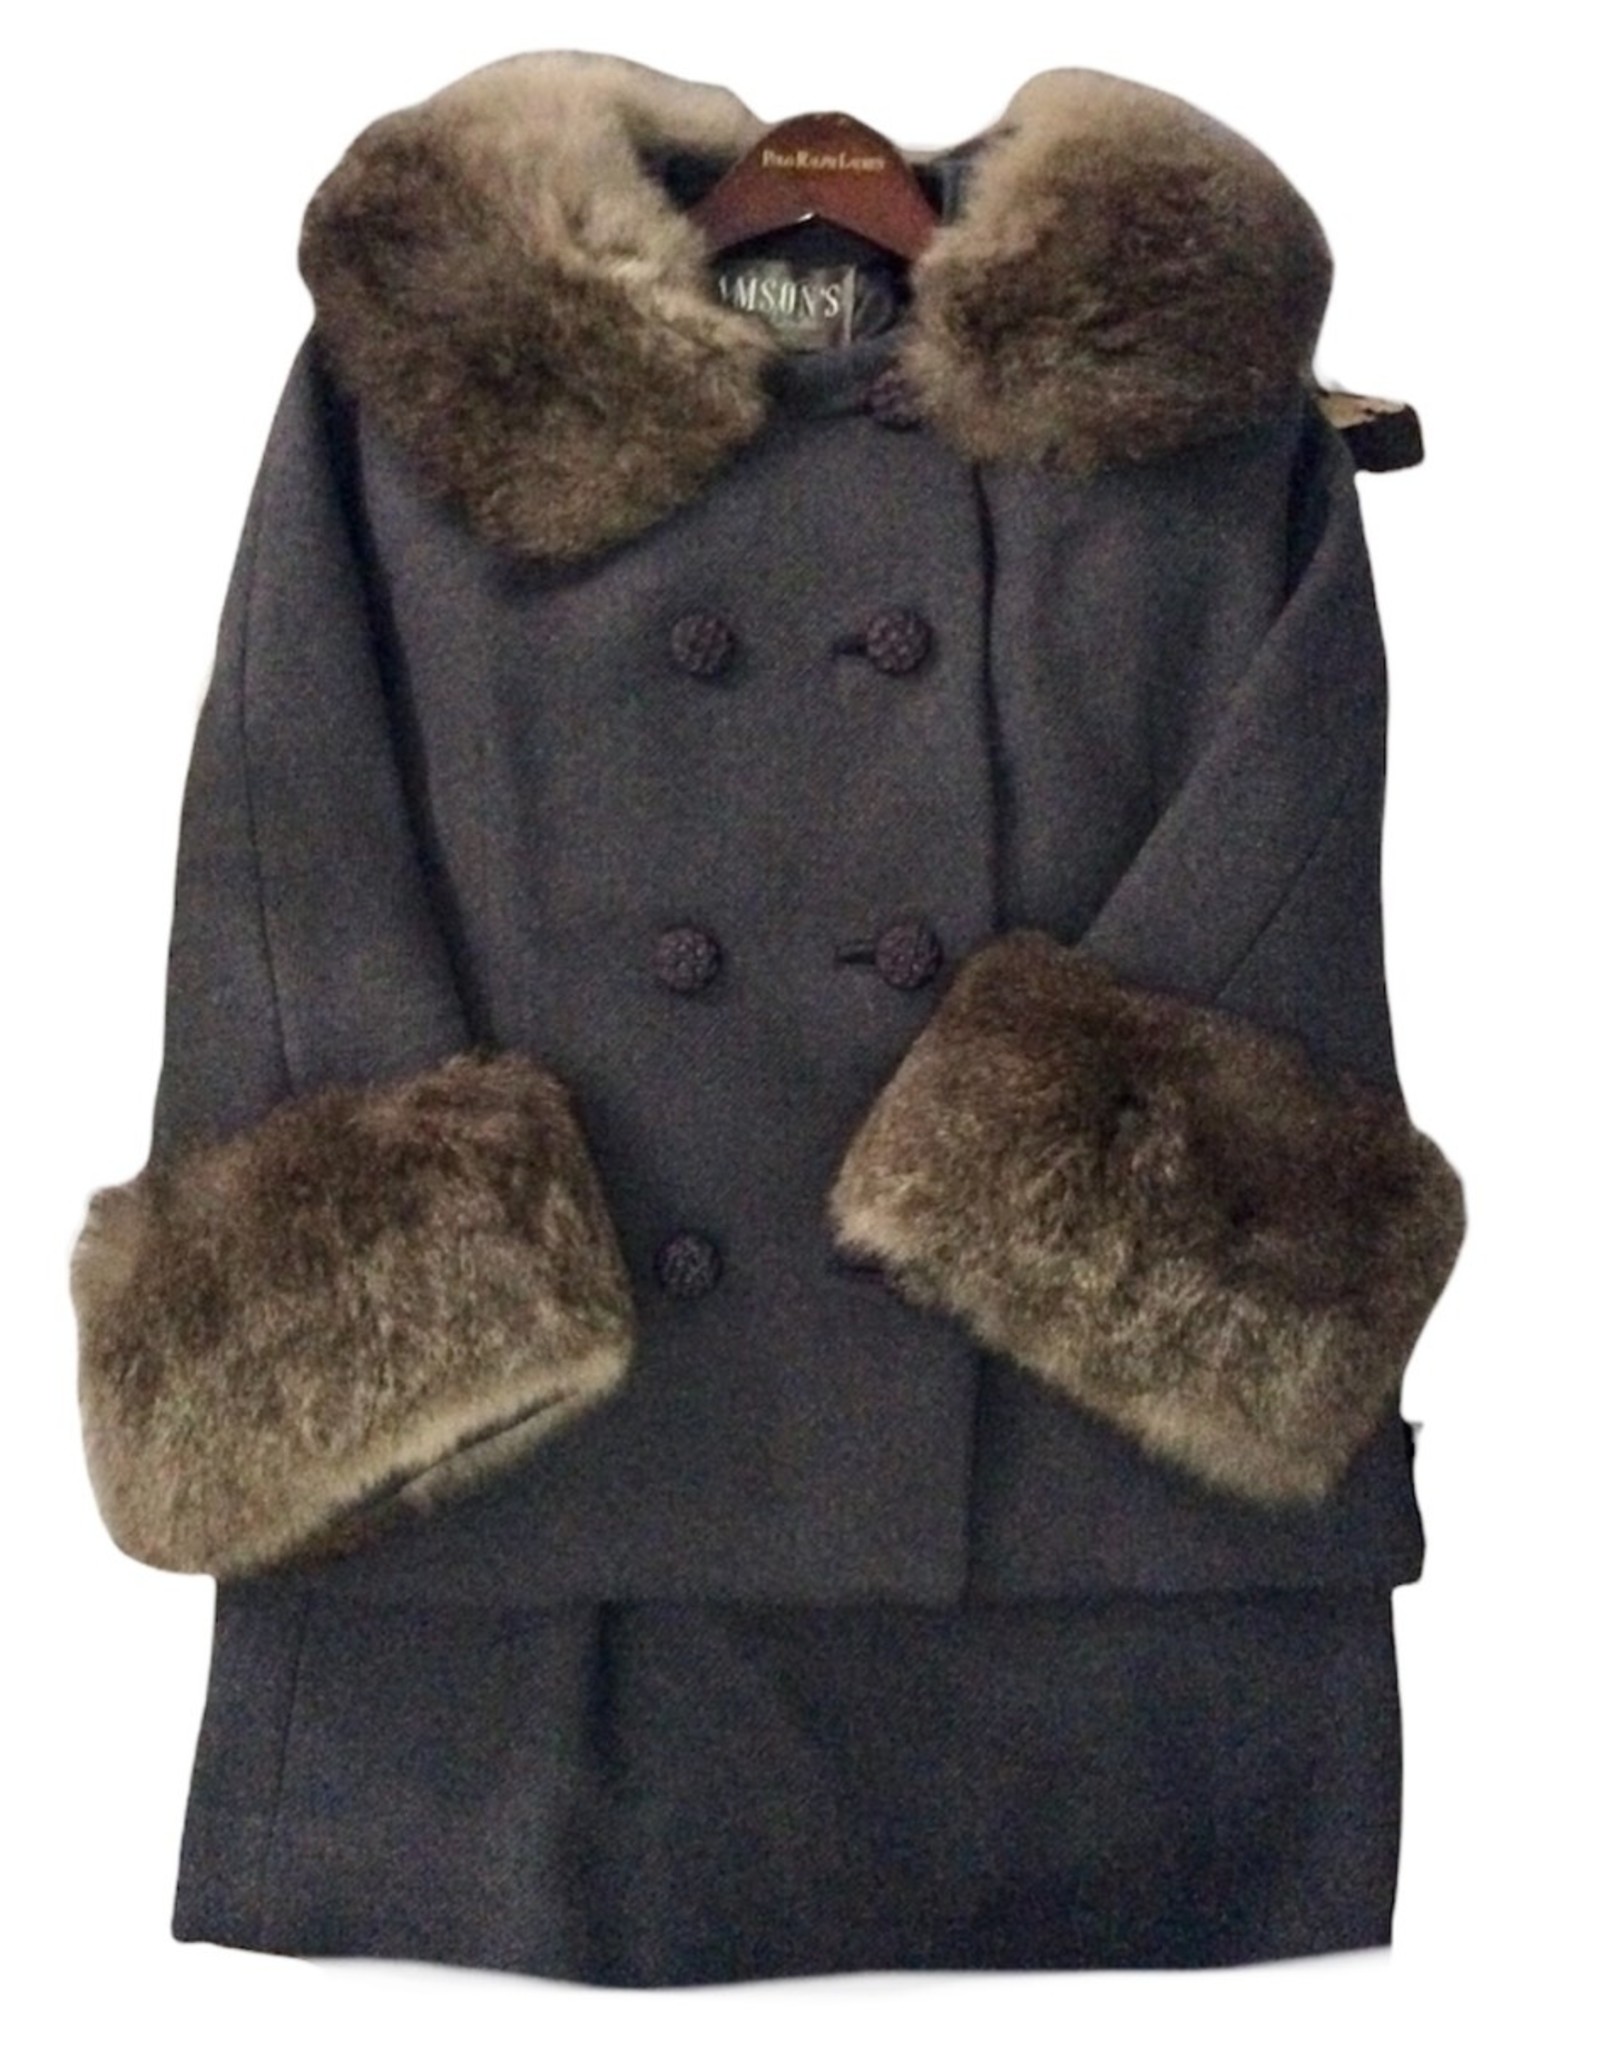 Jameson’s 60’s wool coat and skirt w/ fur collar and cuff